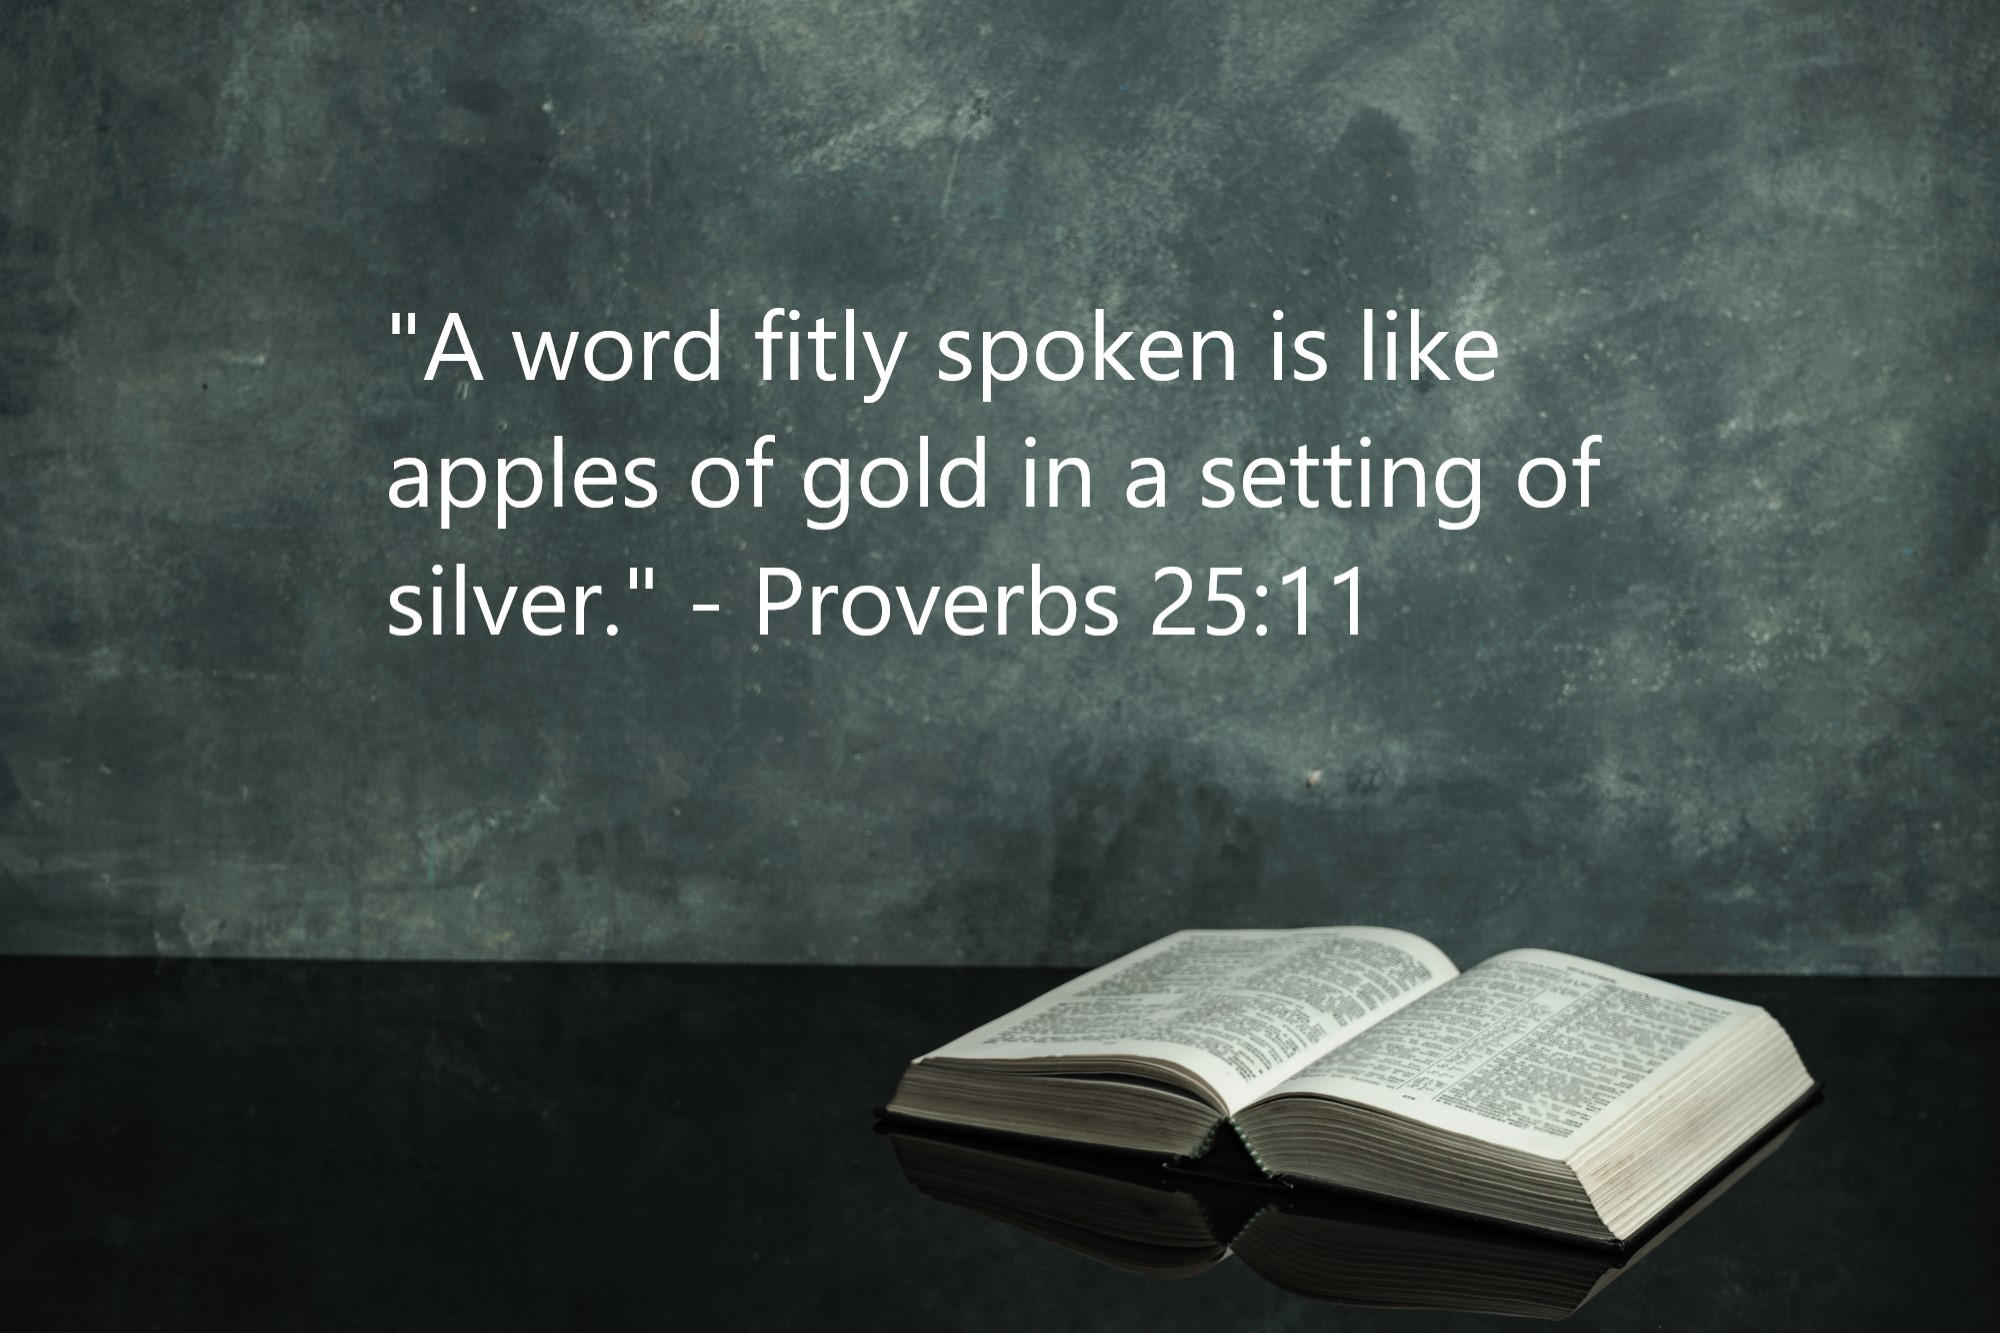 "A word fitly spoken is like apples of gold in a setting of silver." - Proverbs 25:11